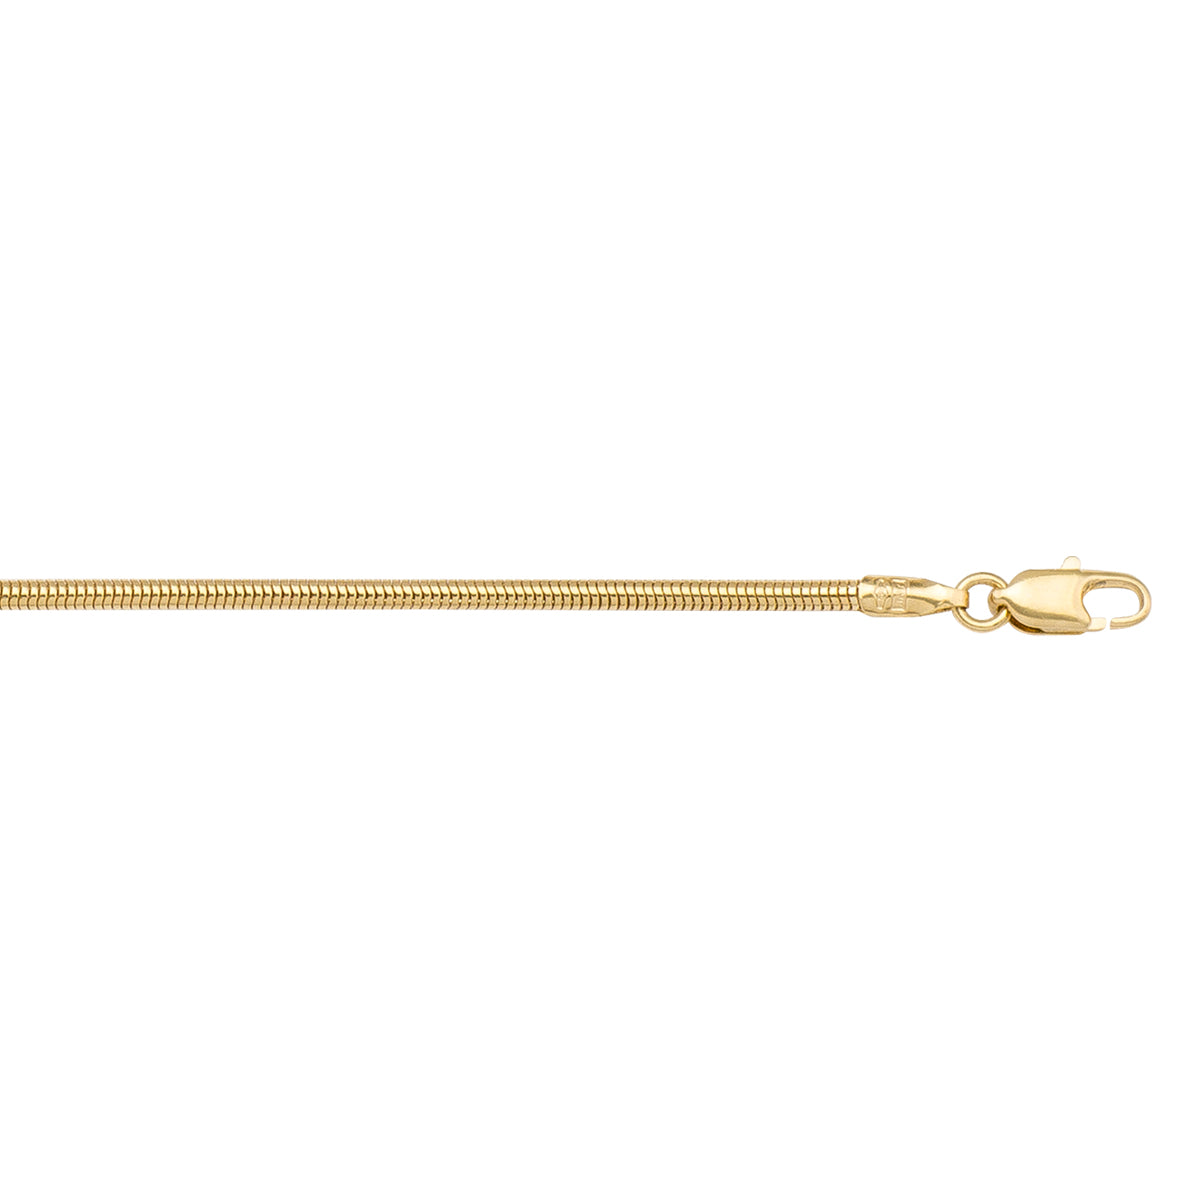 CHAINS YELLOW GOLD ROUND SNAKE LINK 